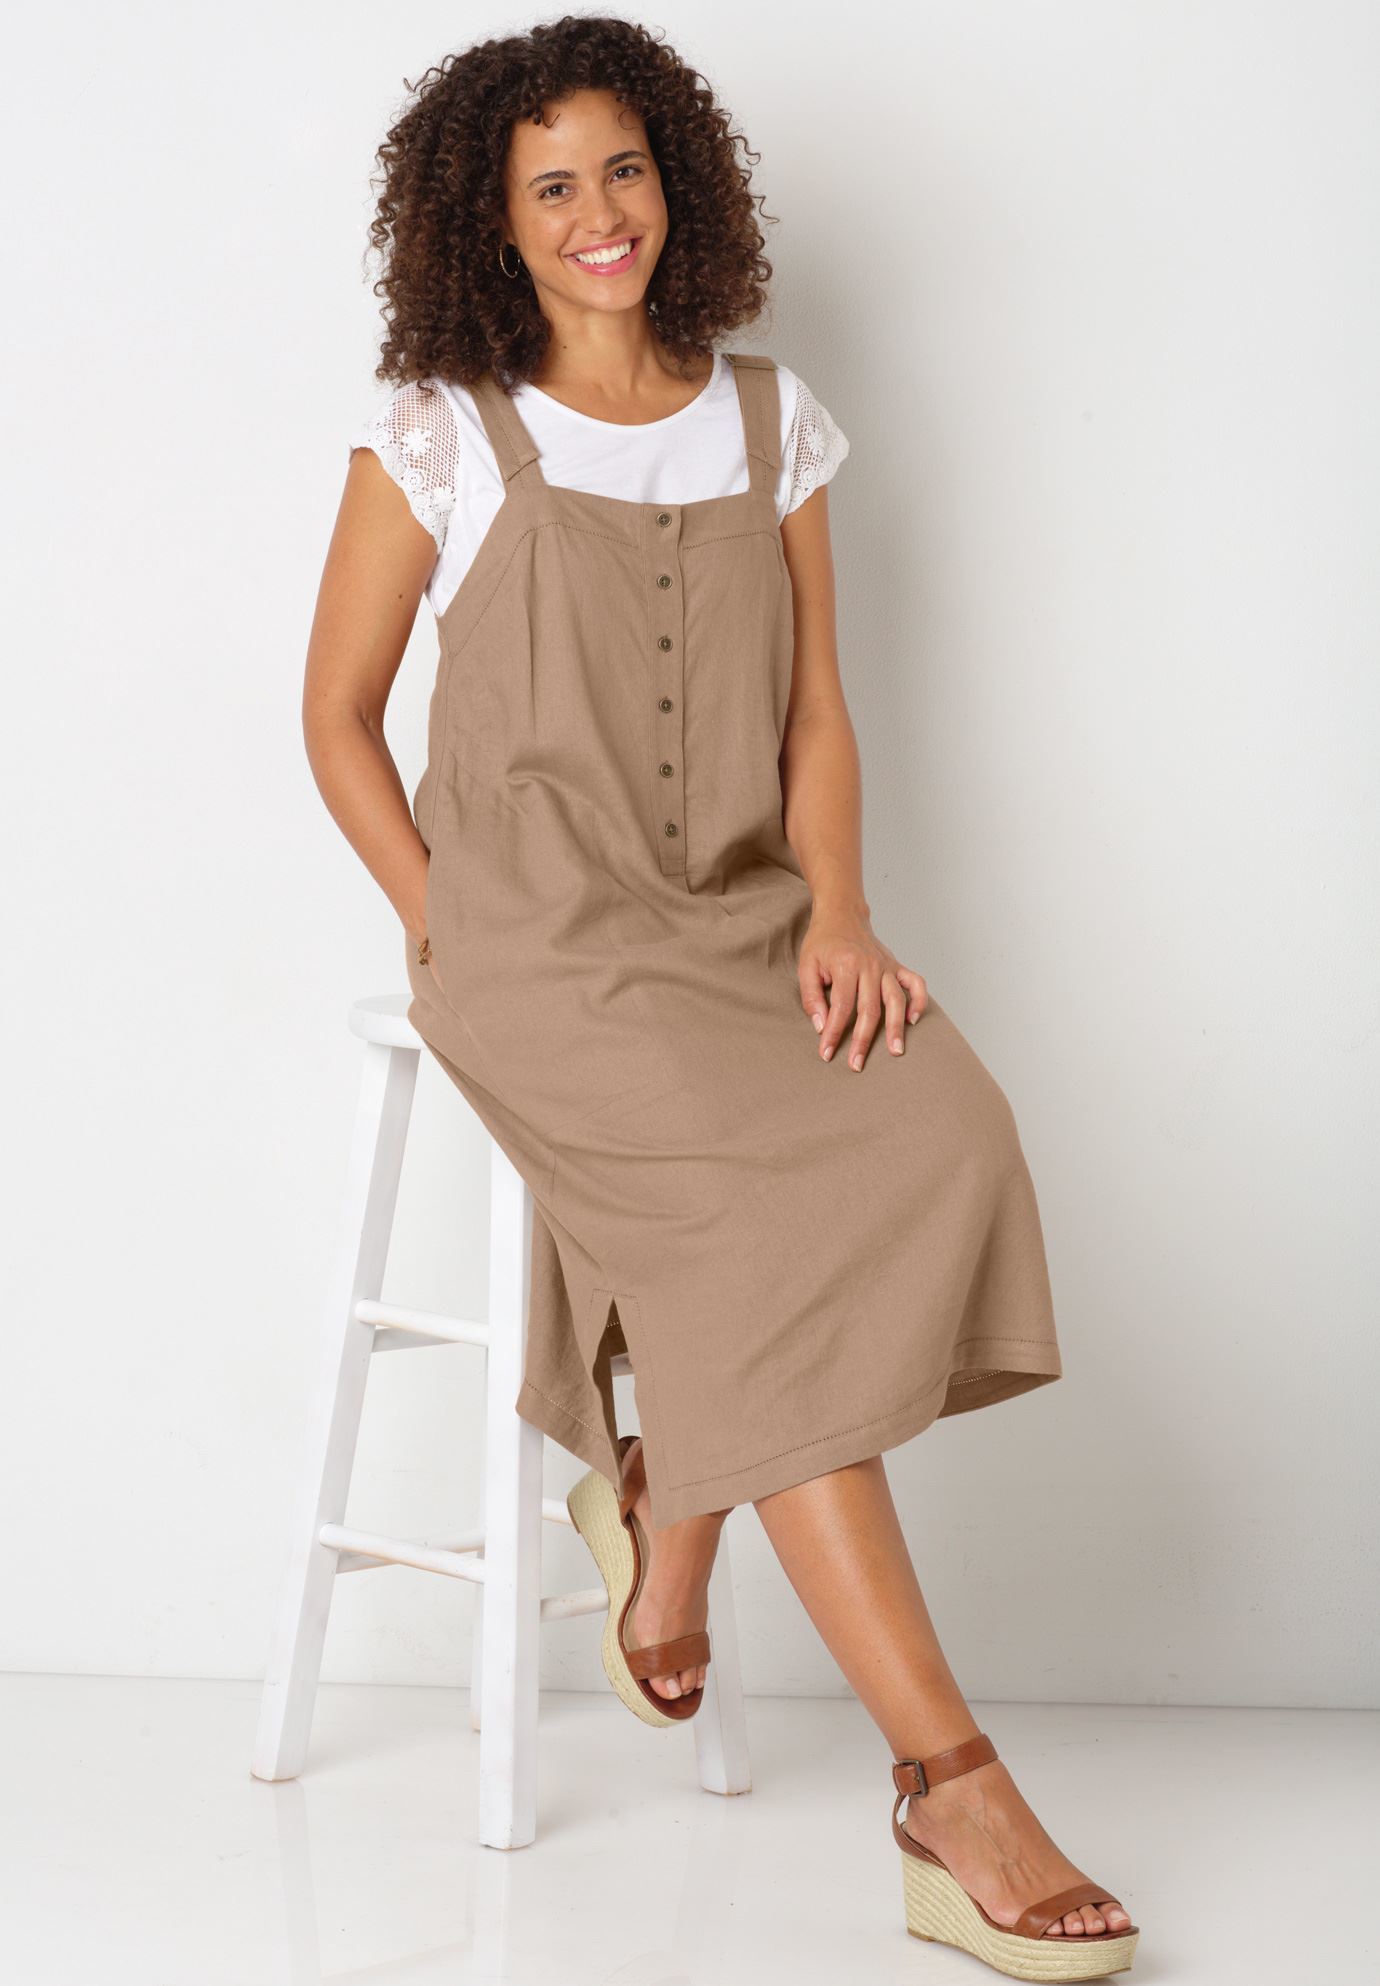 desiree carrier recommends parisa fitz henley feet pic